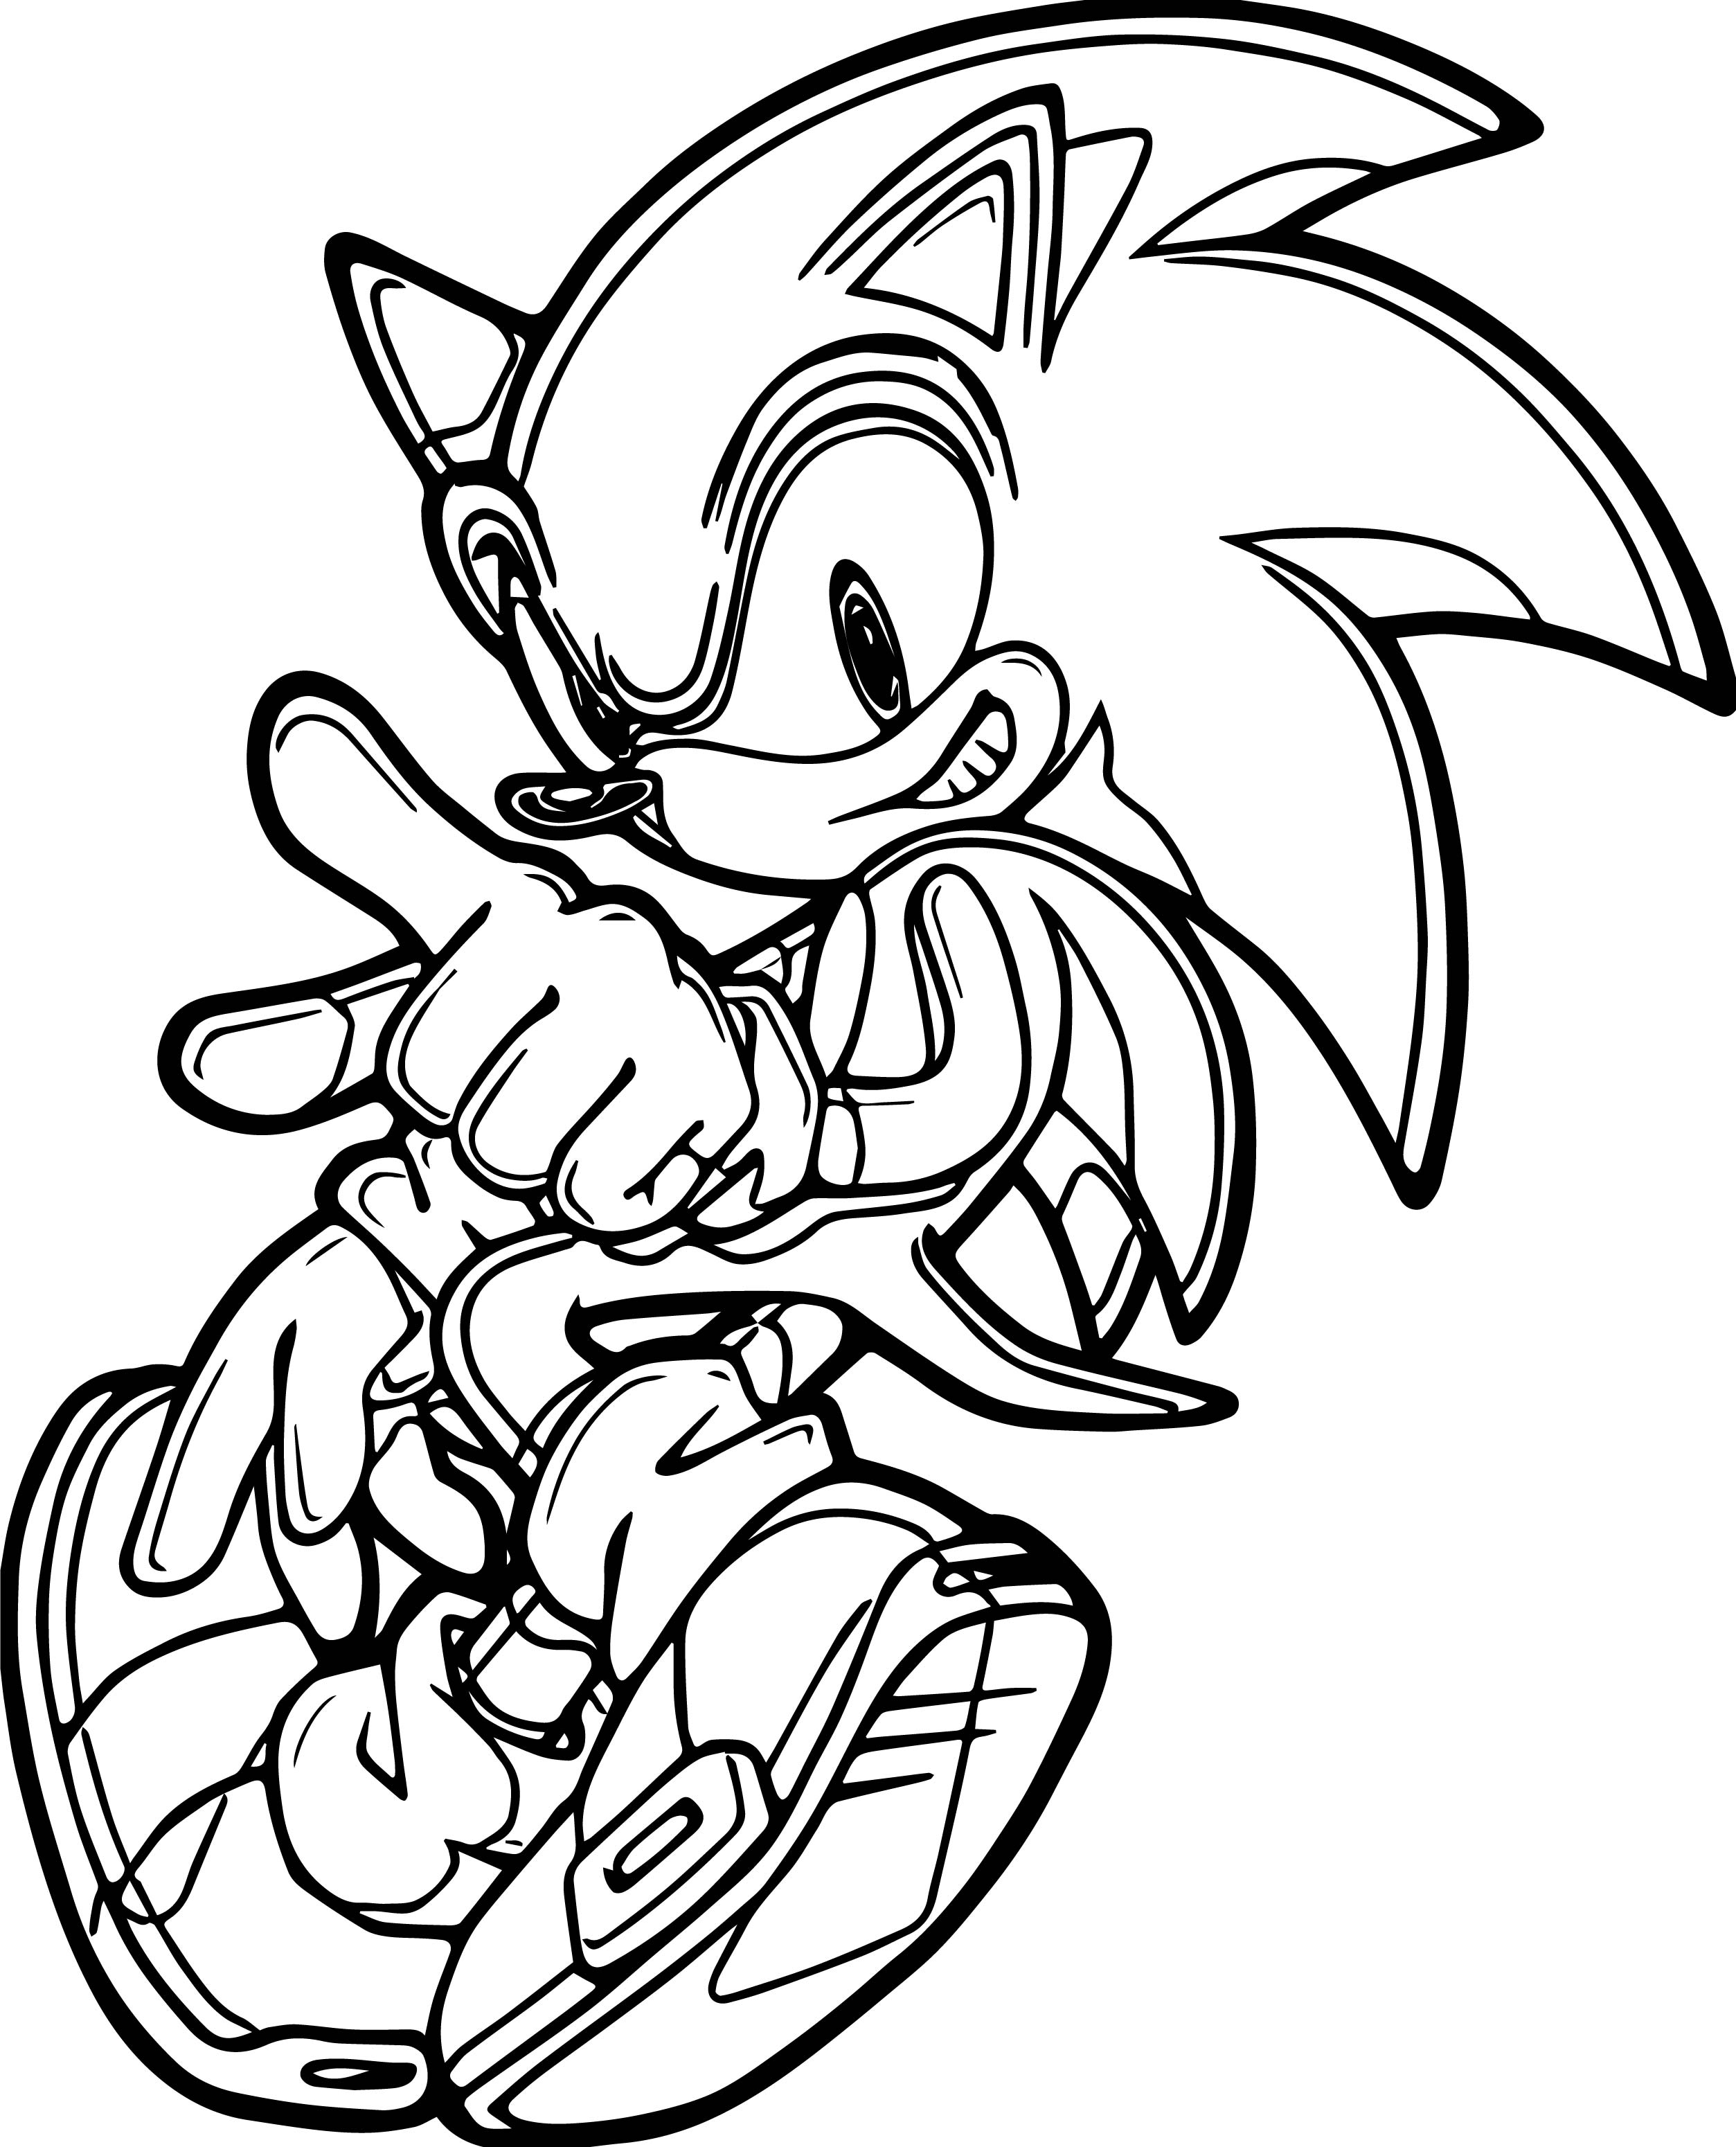 Sonic Cd Coloring Pages Sketch Coloring Page